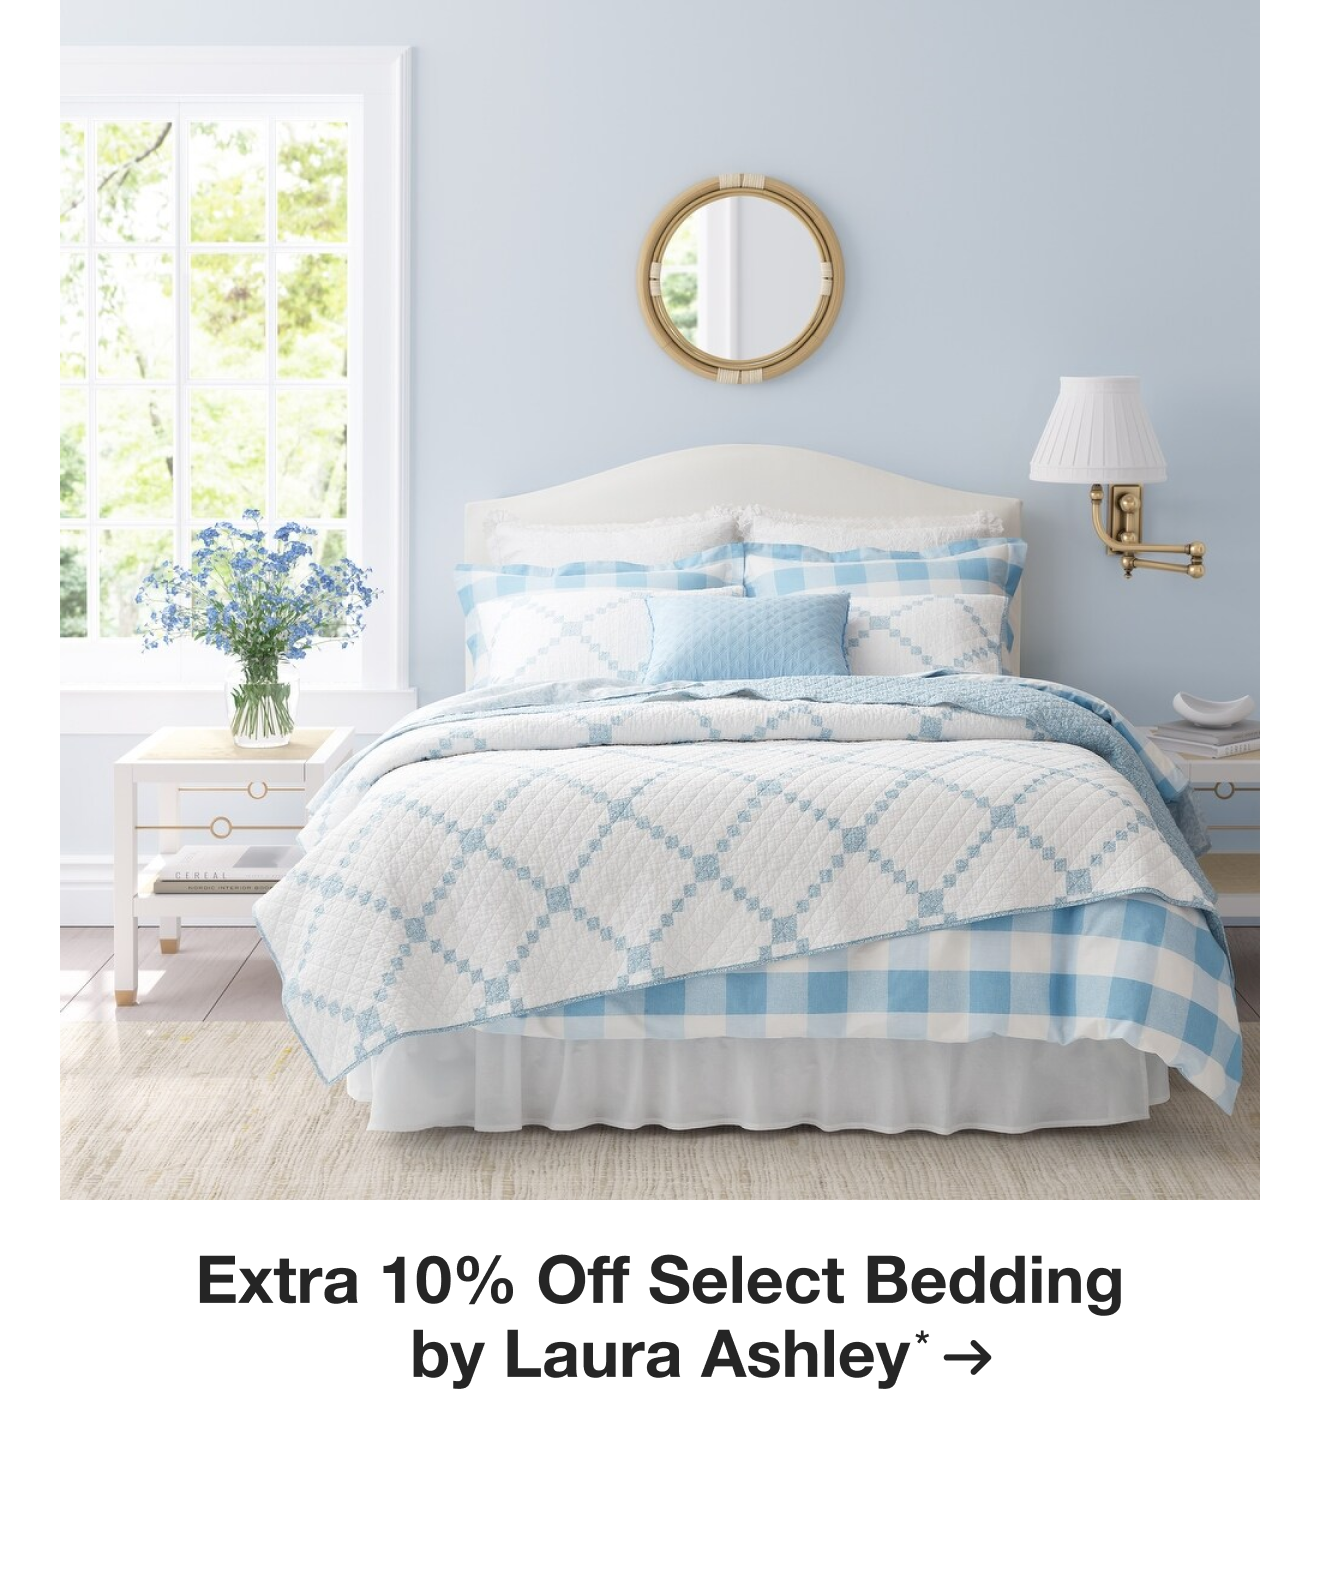 Extra 10% Off Select Bedding by Laura Ashley*